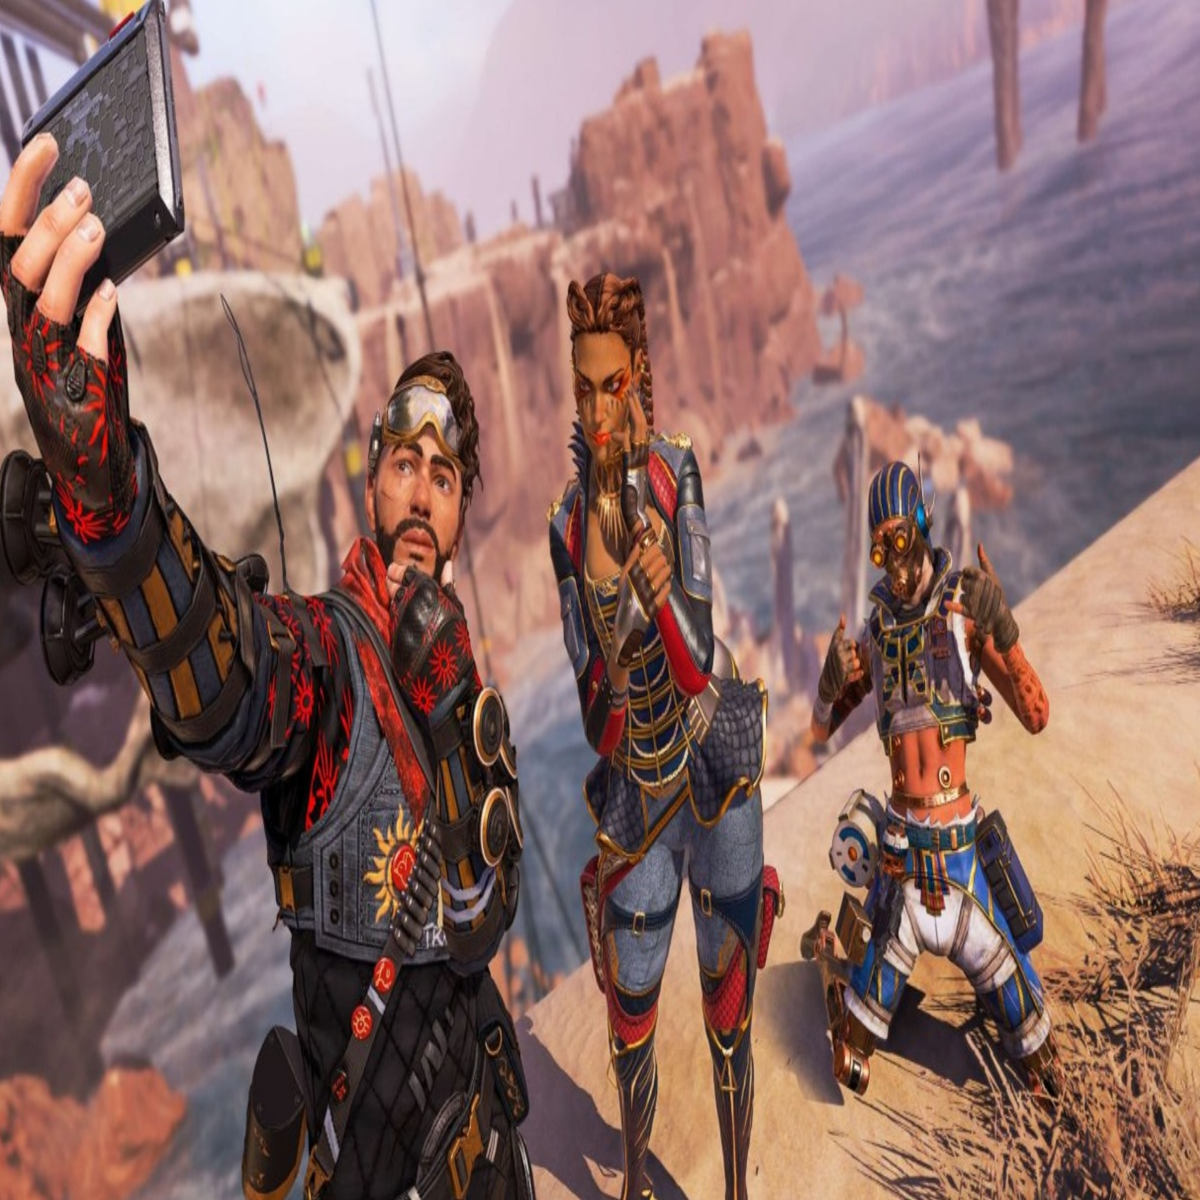 How to Change Your Apex Legends Name on PC or Console